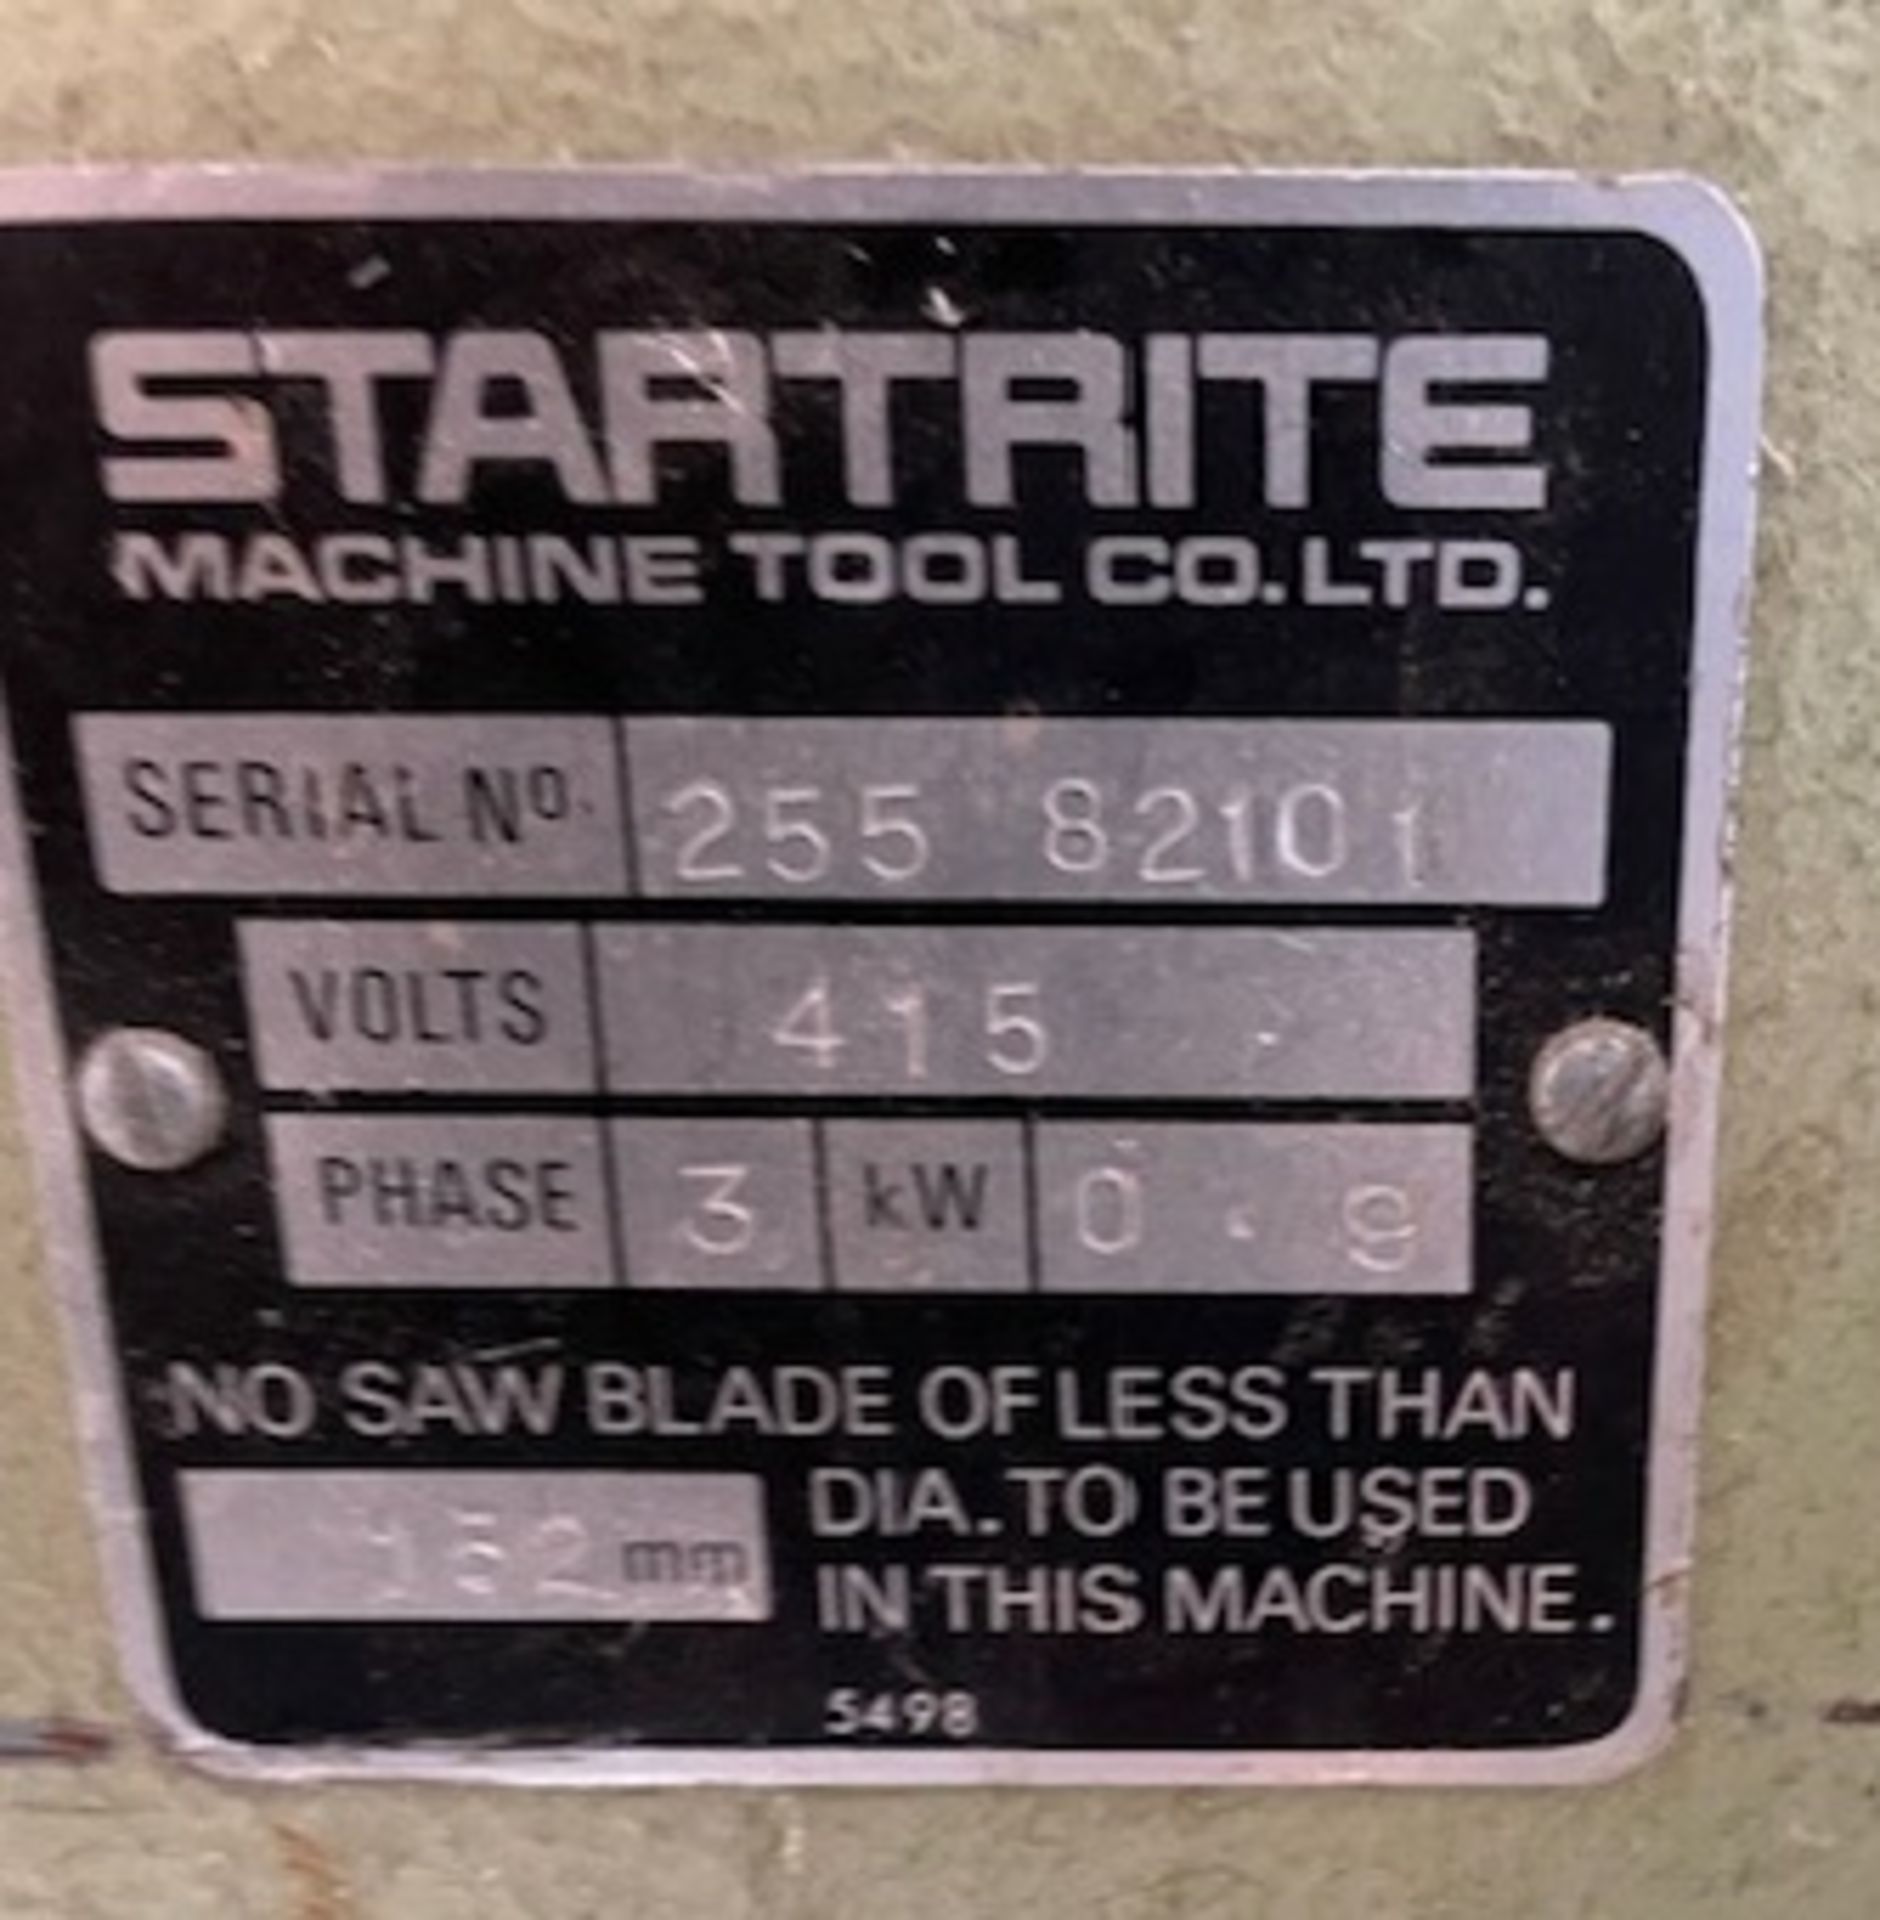 Startrite TA255 3-Phase Circular Saw, Serial Number 25582101 with Table Extension (Location: Earls - Image 2 of 2